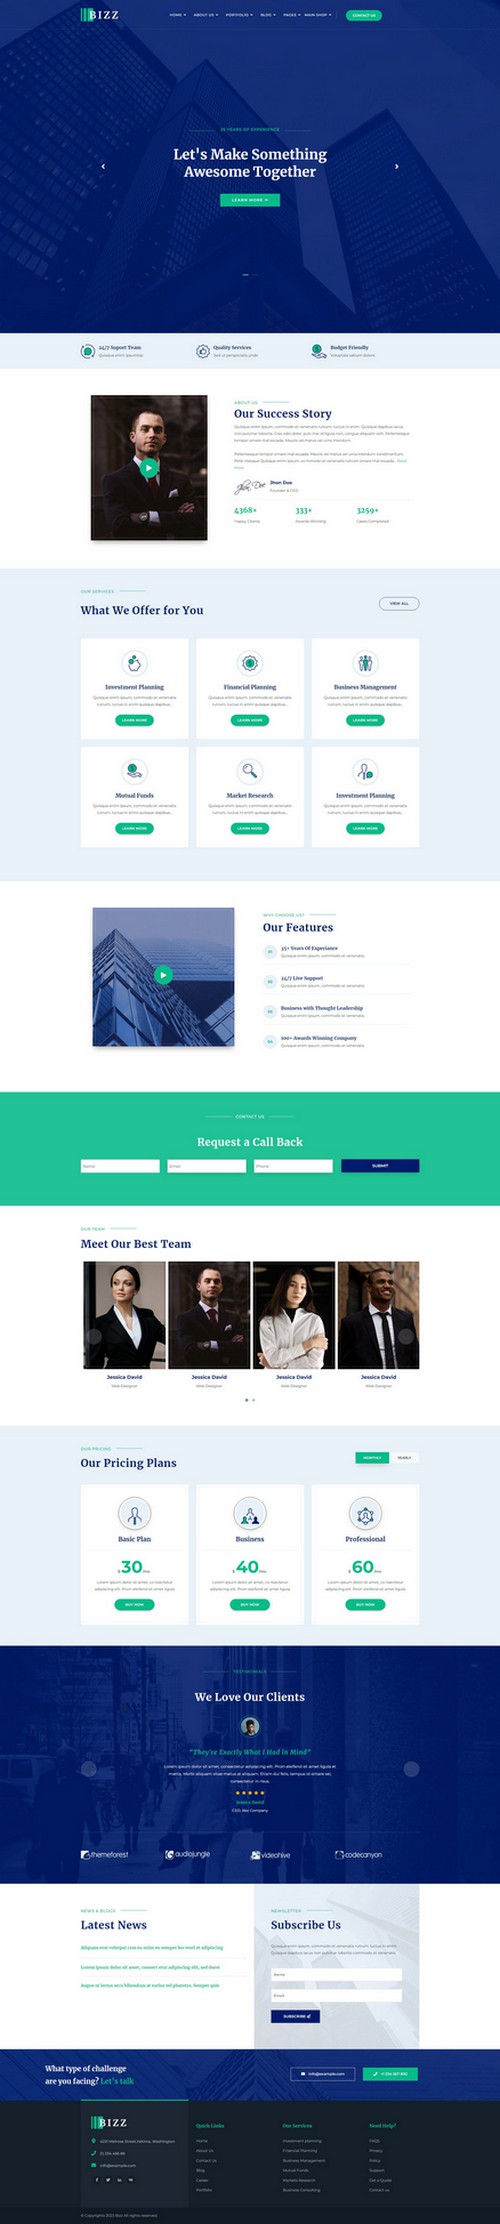 Bizz - Business Consulting and Professional Joomla 4 Template